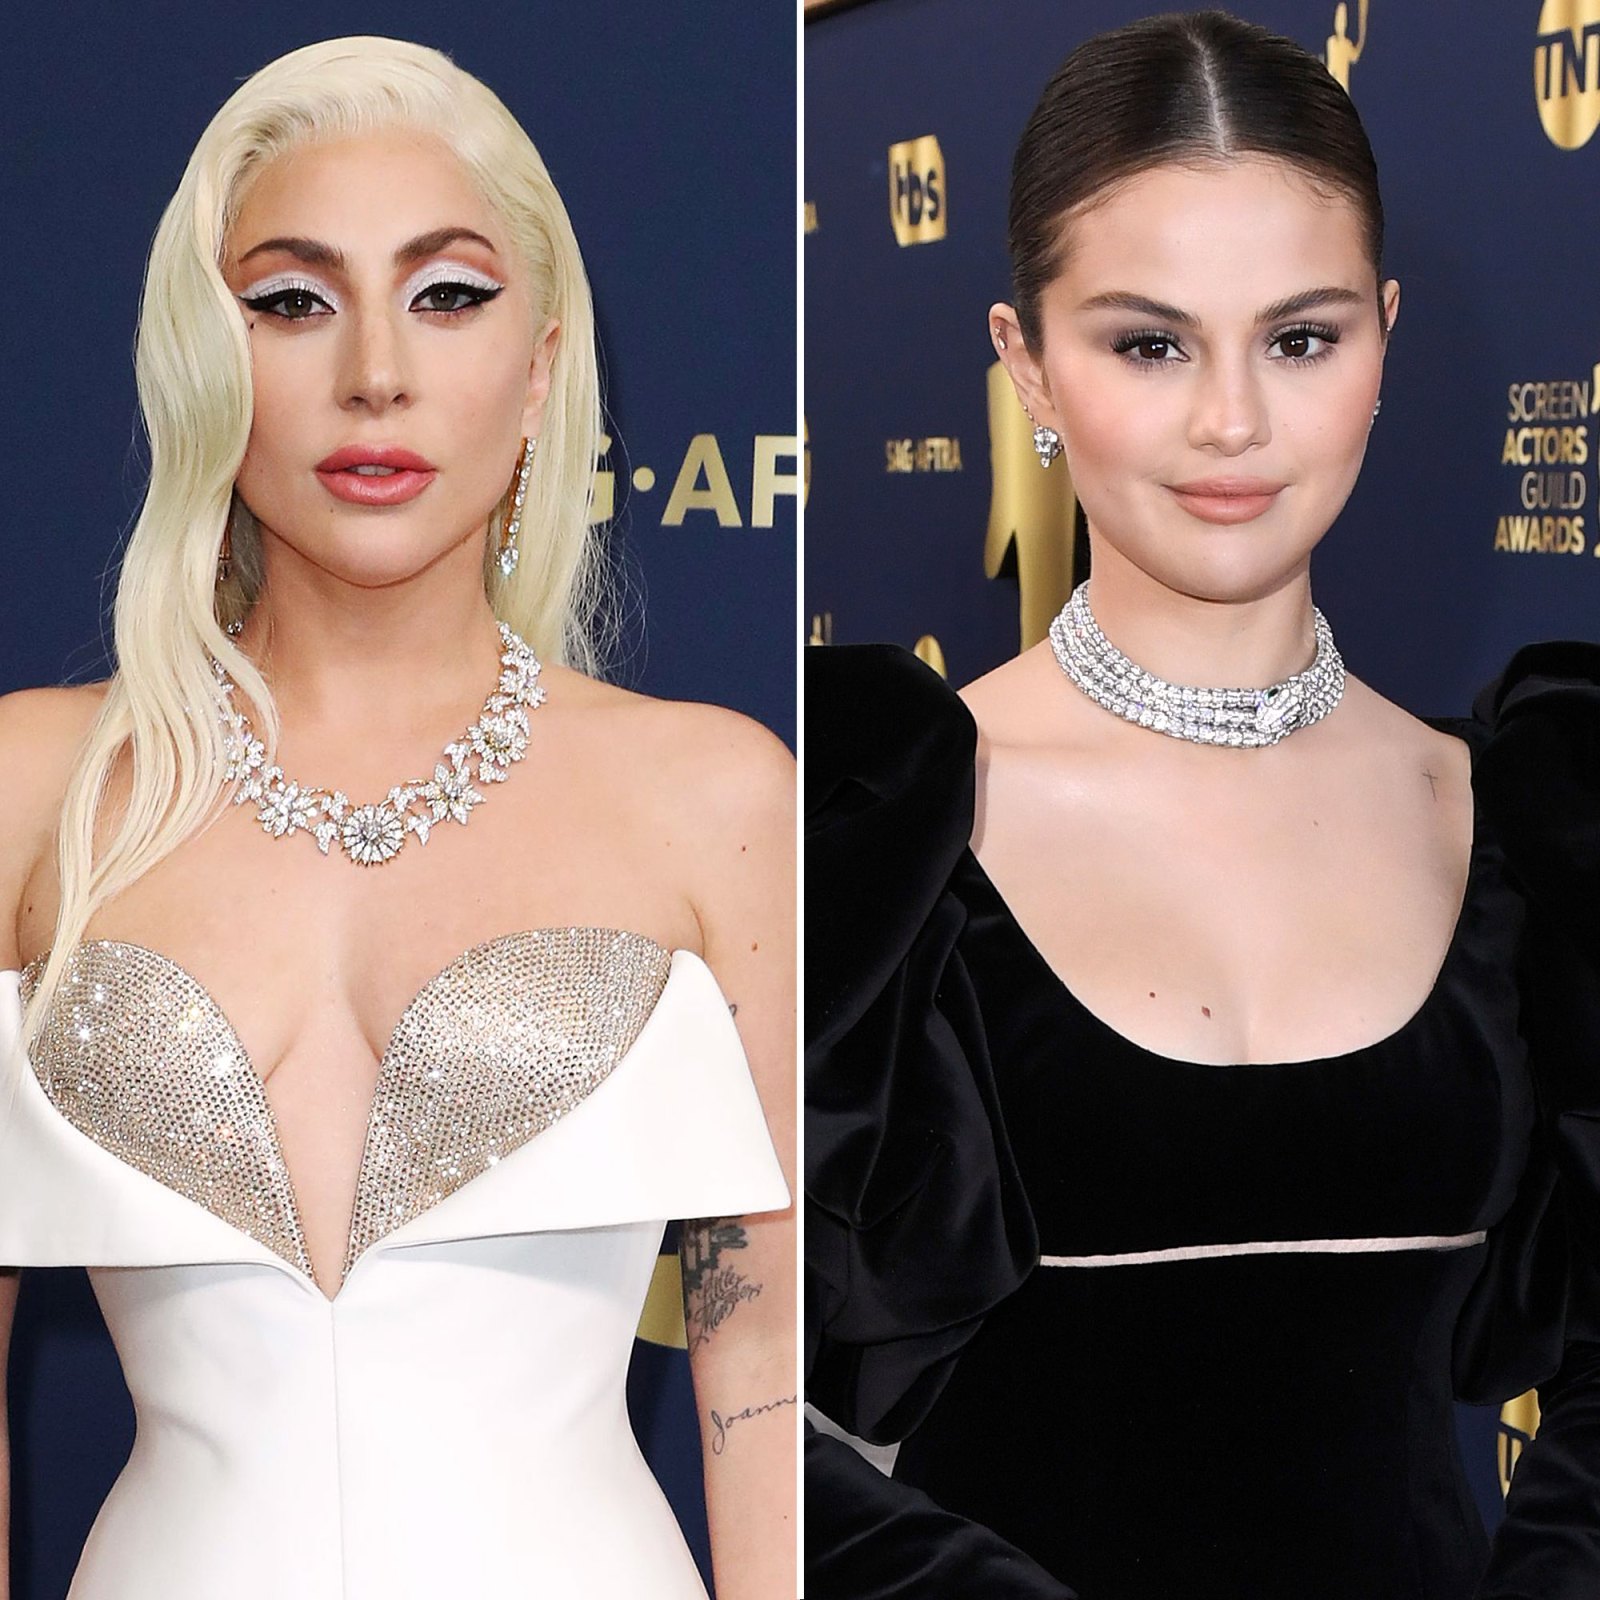 Craziest Celebrity Bling From the SAG Awards 2022